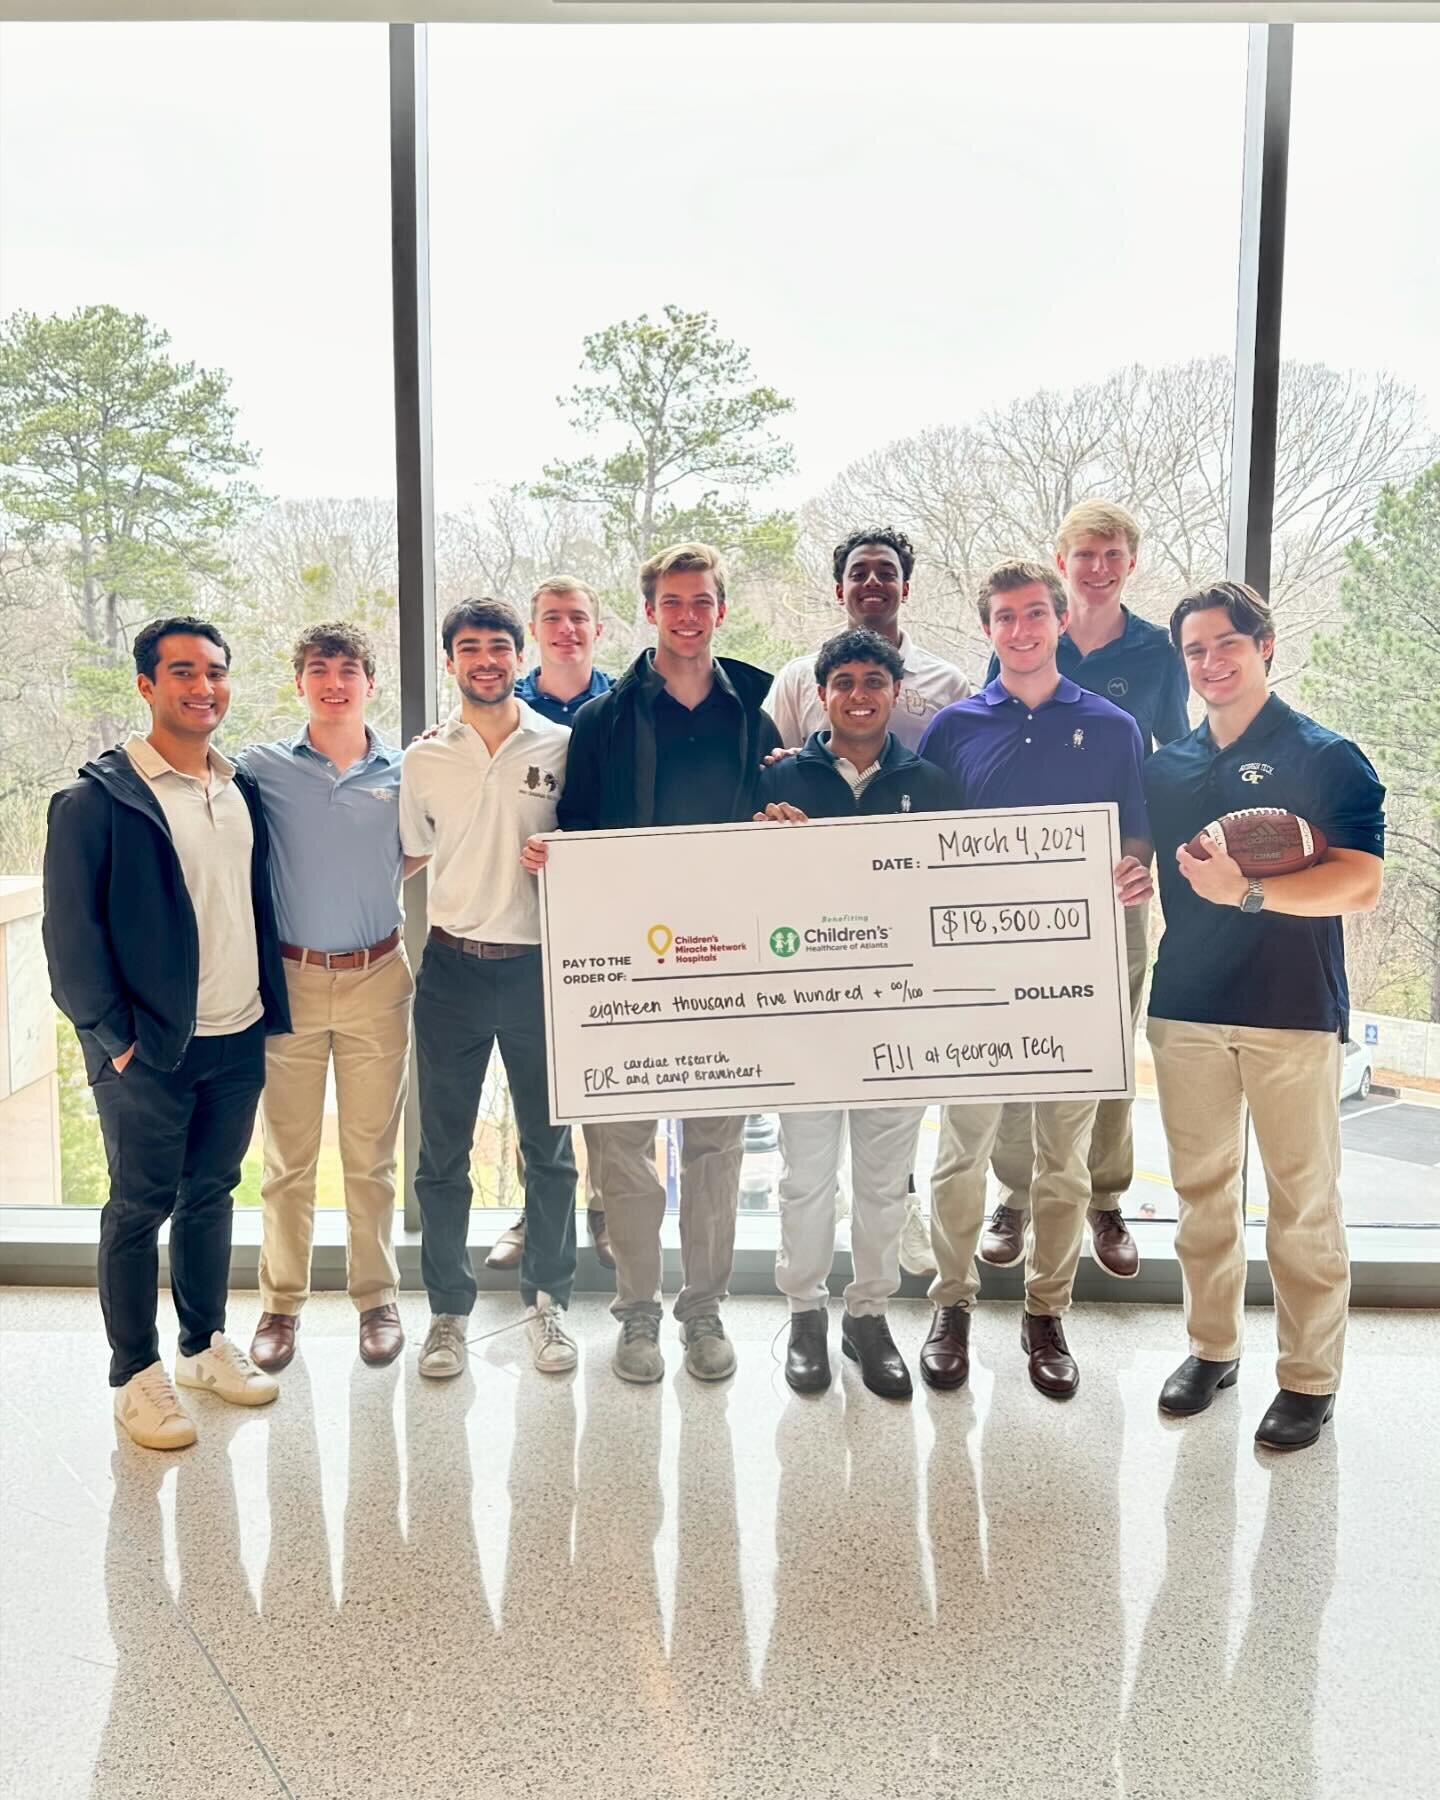 Fiji had the pleasure of touring the New Health Sciences Research Building at Emory with Dr. Davis where we donated $18,500 to Children&rsquo;s Healthcare of Atlanta! Thank you to everyone who donated and @_dhruvak, who organized the donation and is 